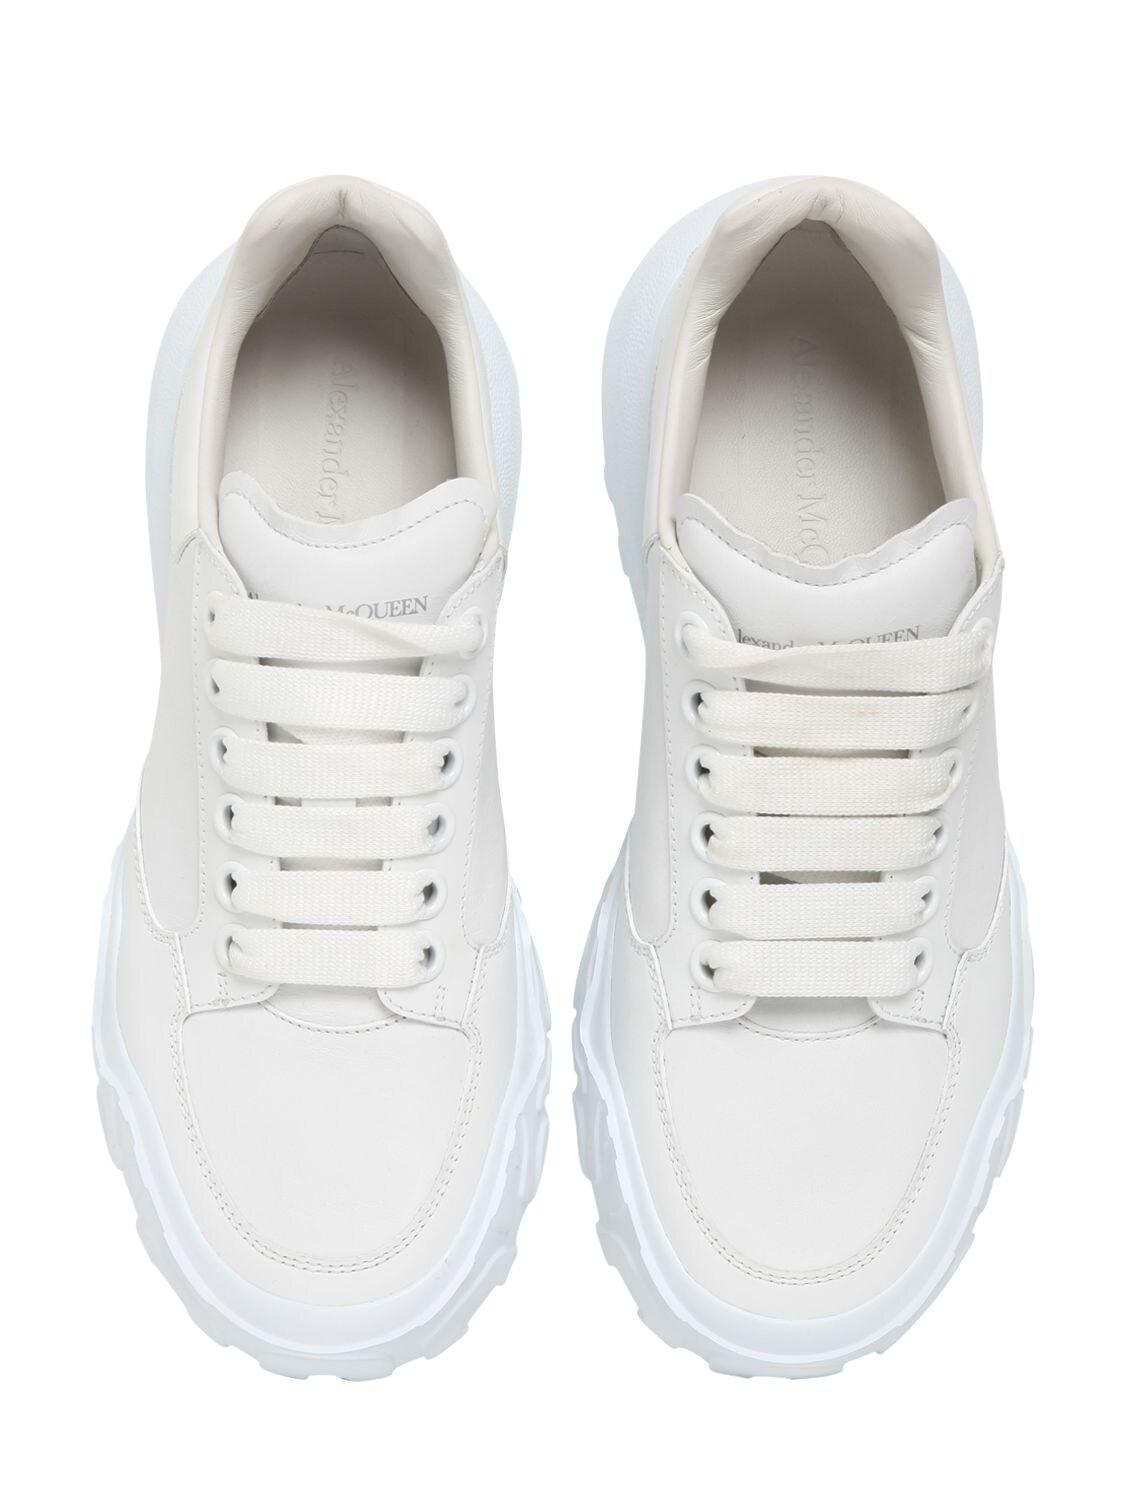 Alexander McQueen 45mm Court Trainer Leather Sneakers in White - Lyst